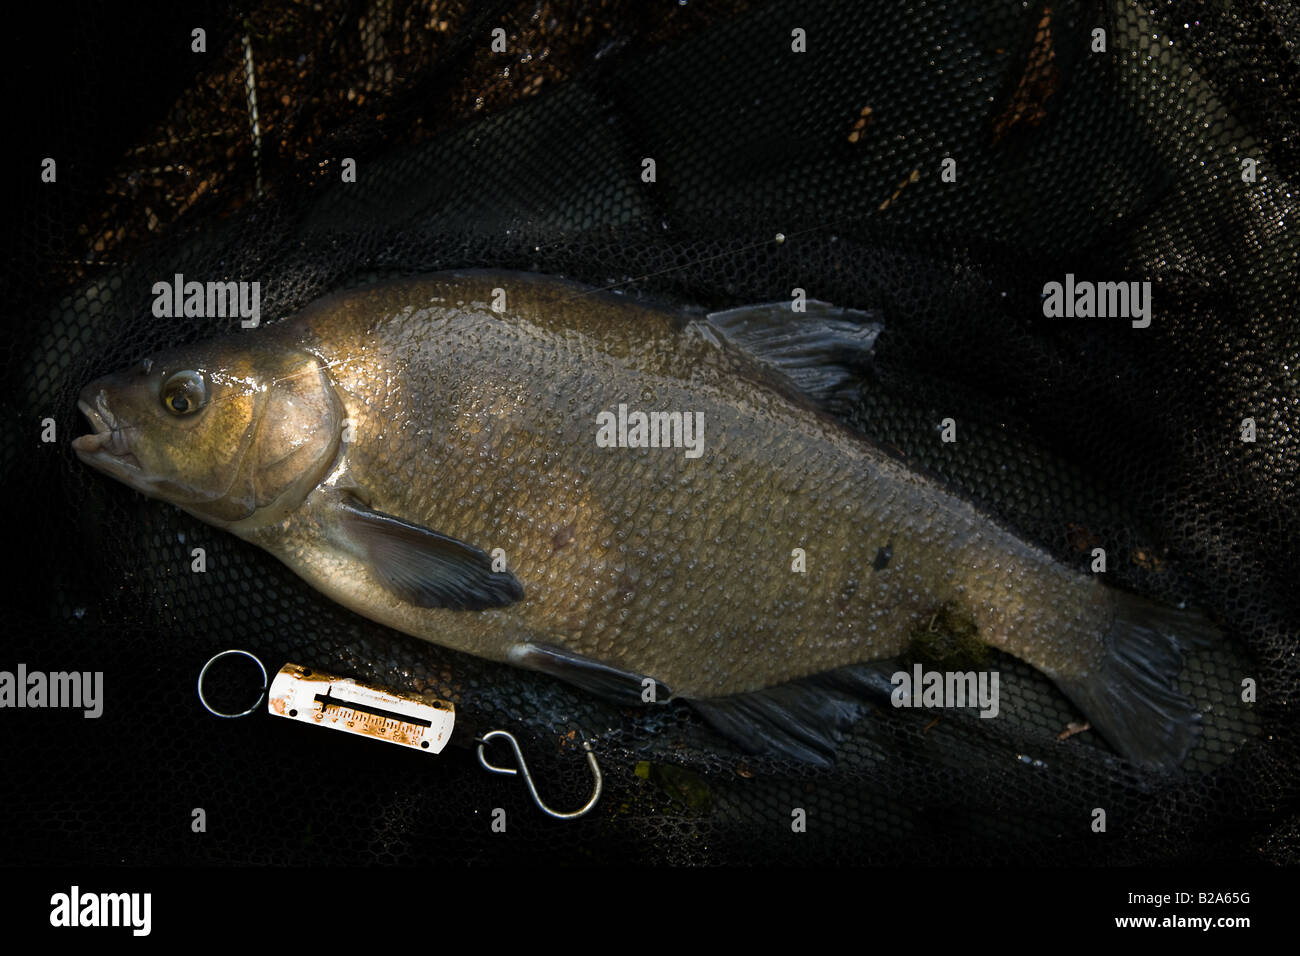 A Common Bream freshwater fish on a landing net and unhooking mat before being returned safely to the water Stock Photo